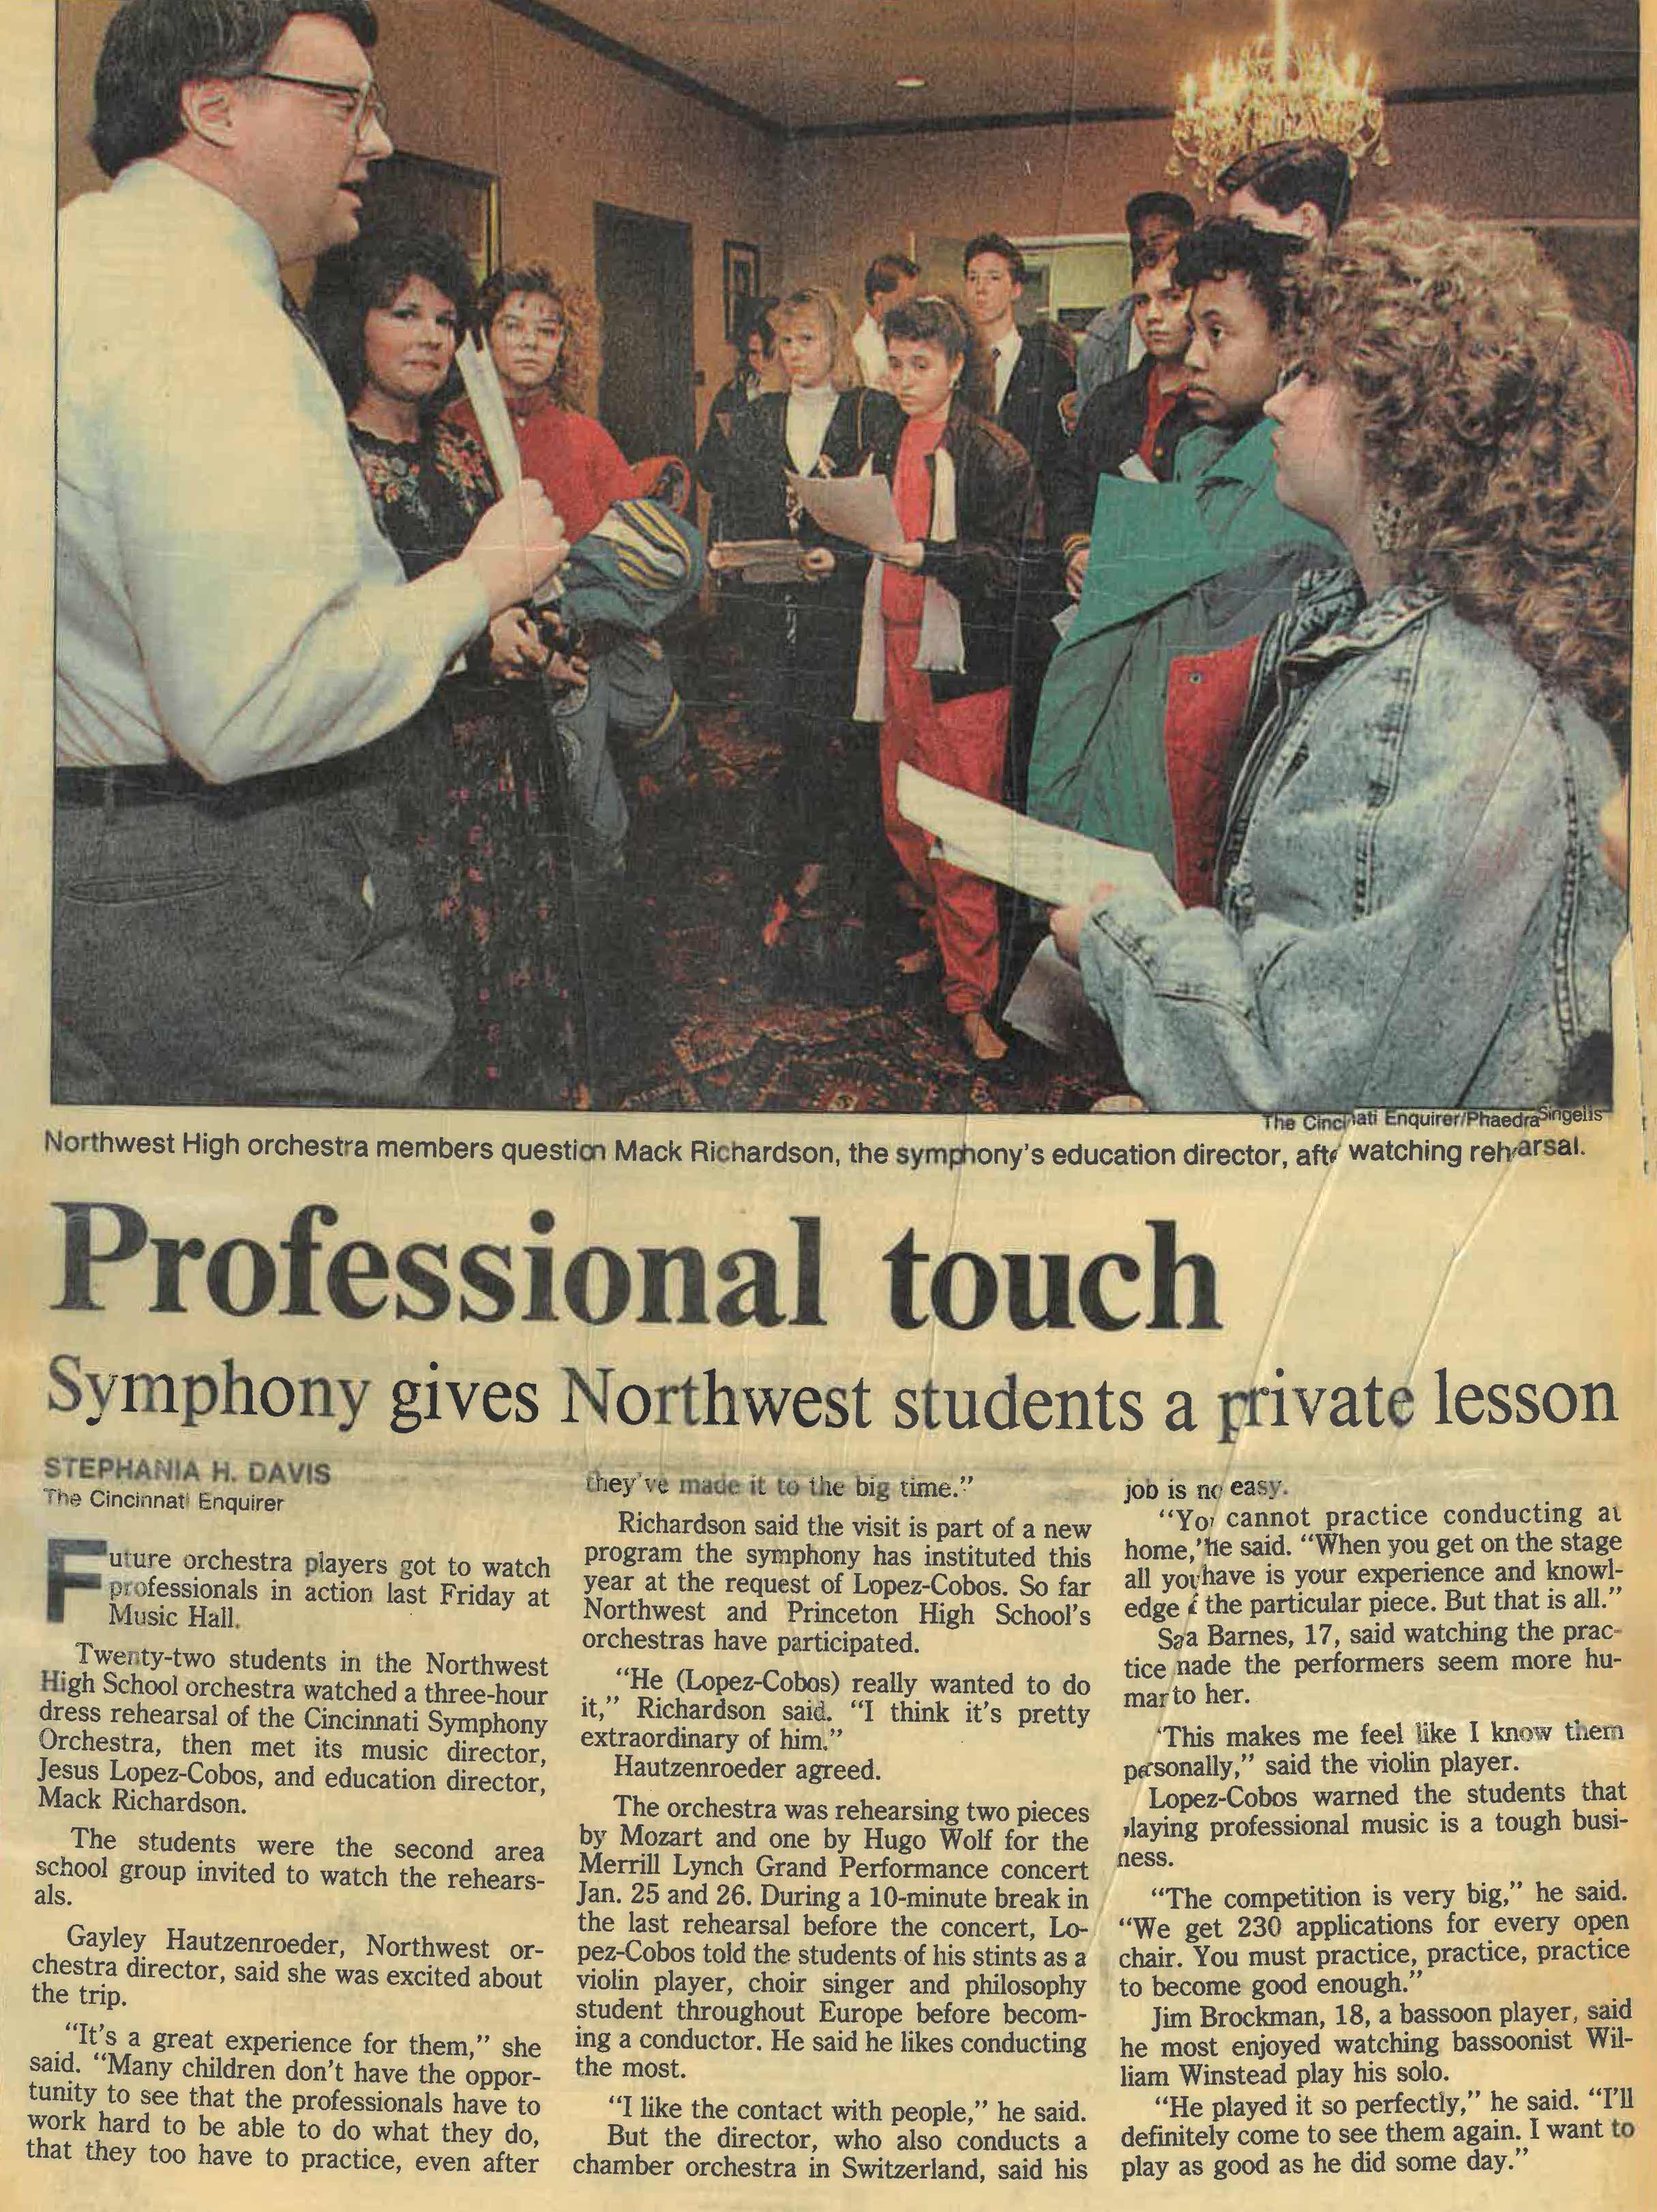 The Cincinnati Enquirer, January 1991, article on the CSO Education Program and Northwest High School students